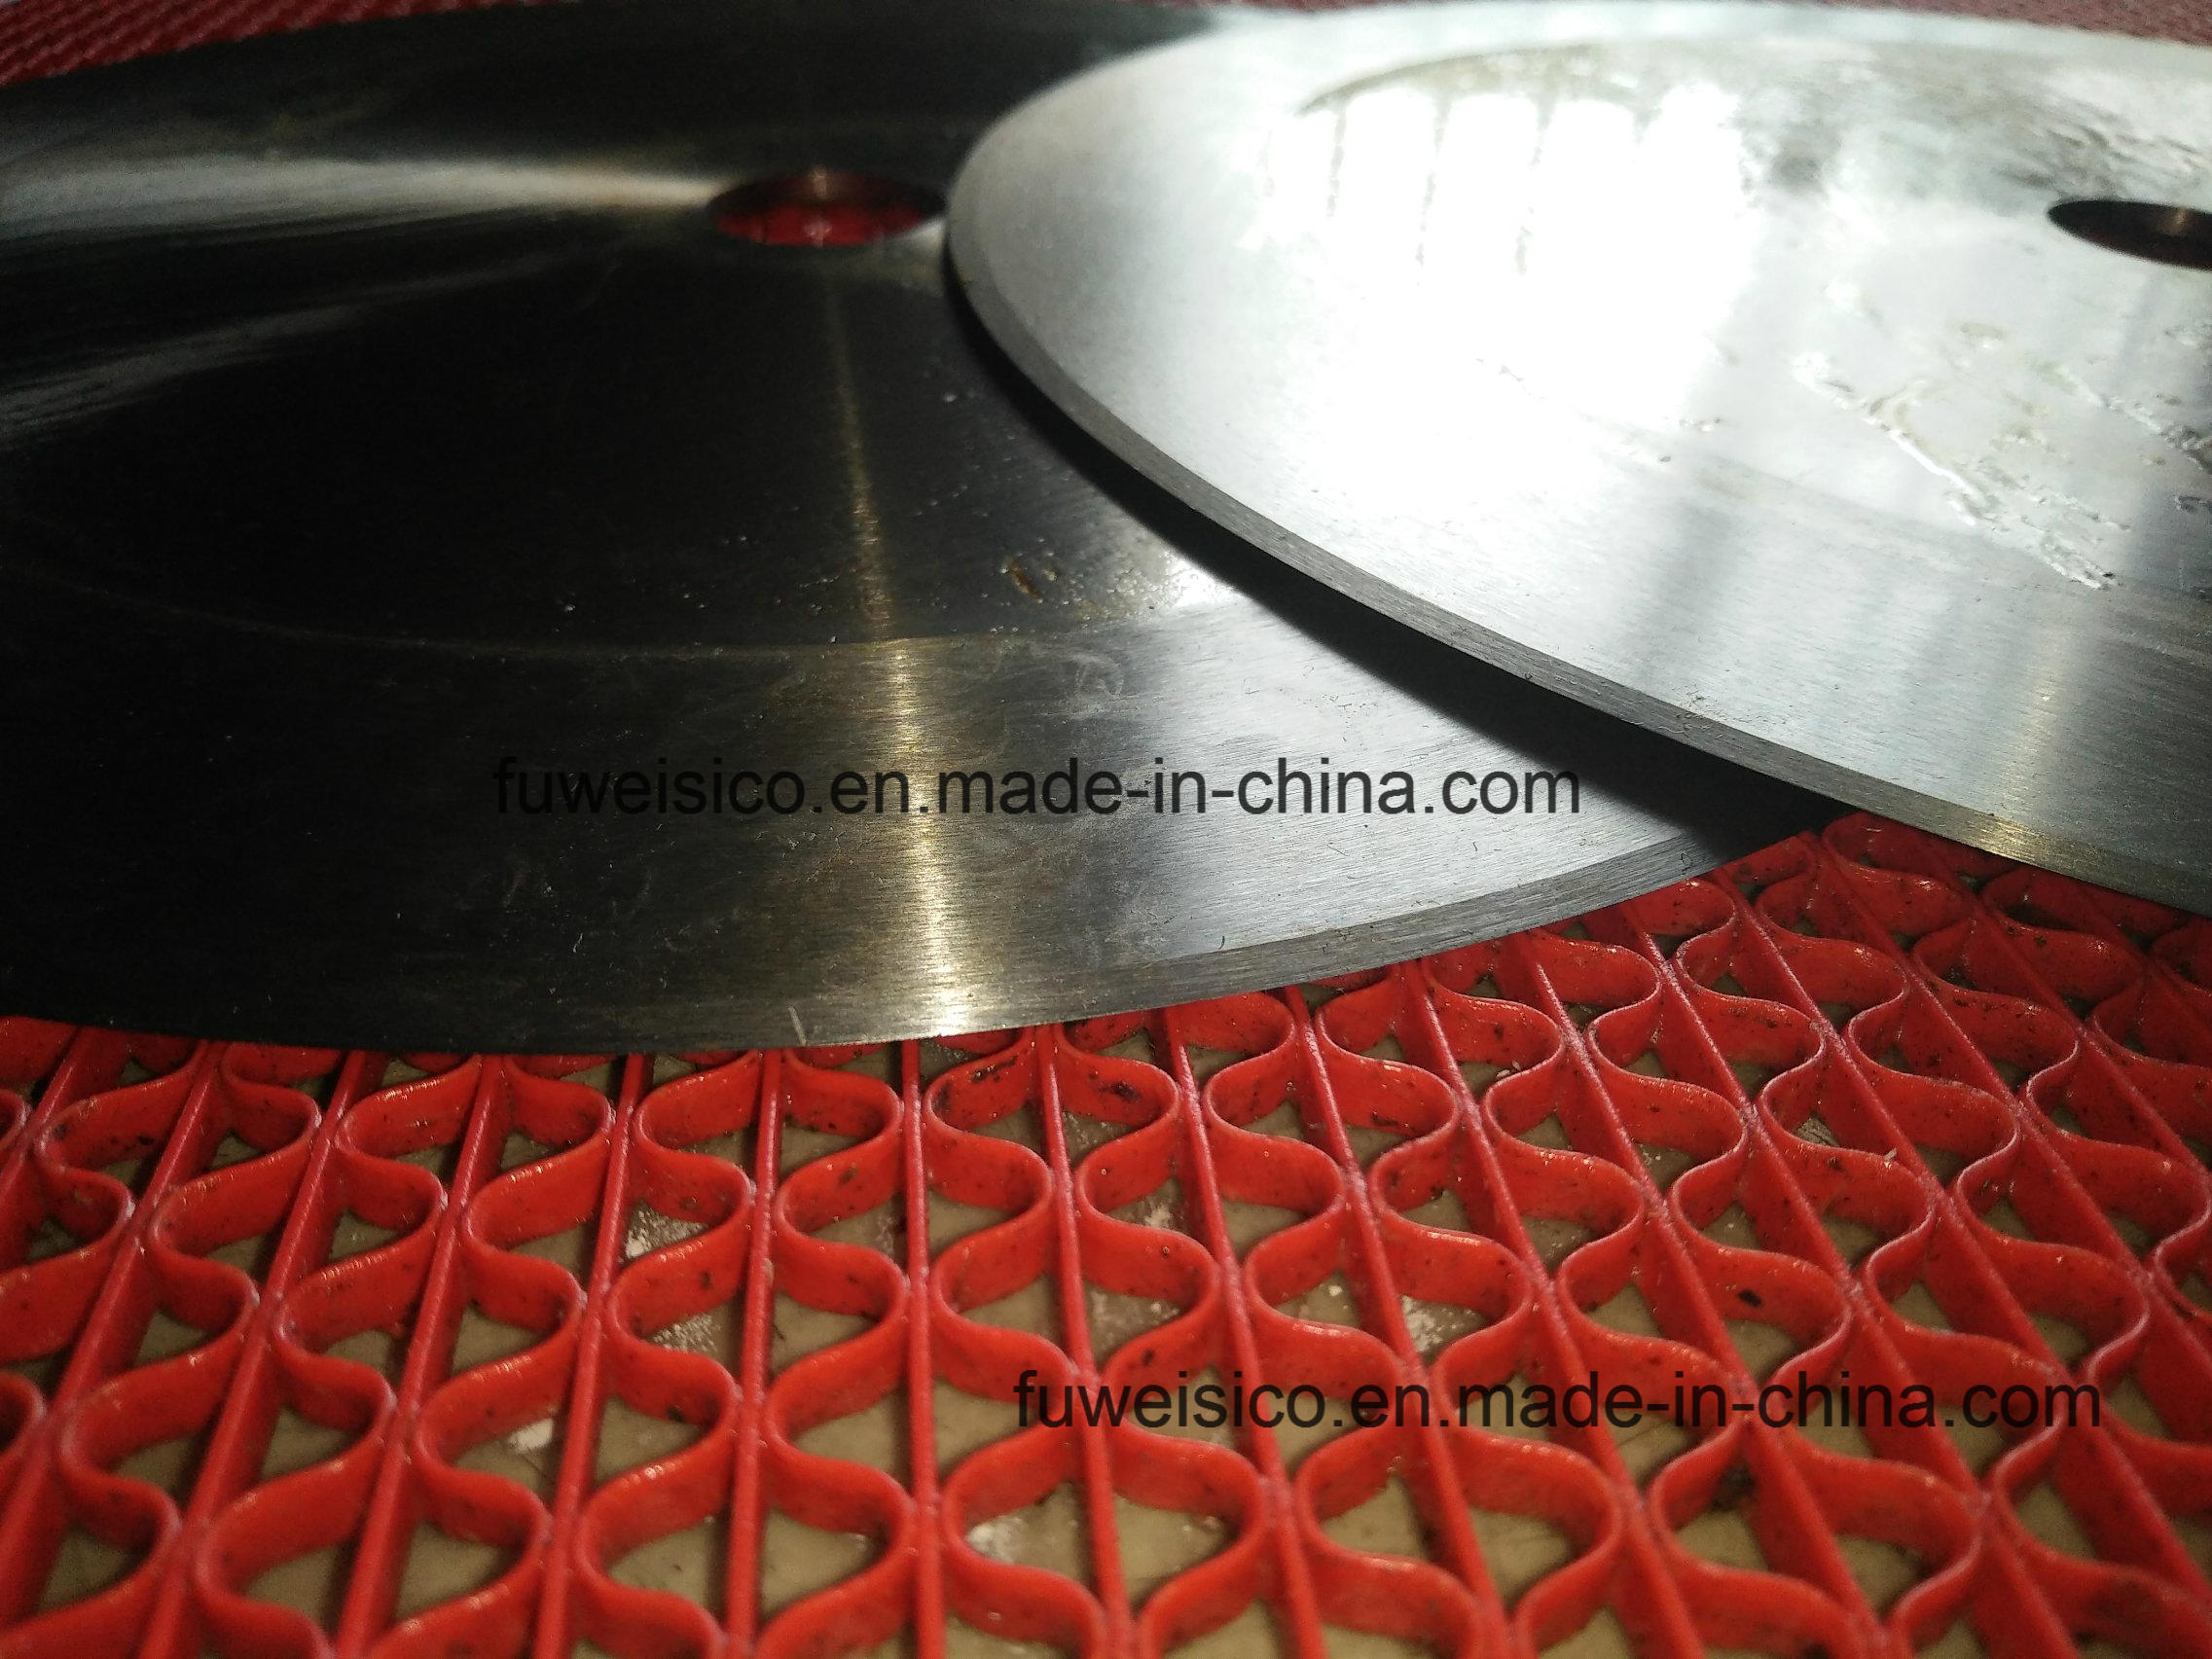 121 X 1.0mm Printing Industry Knives